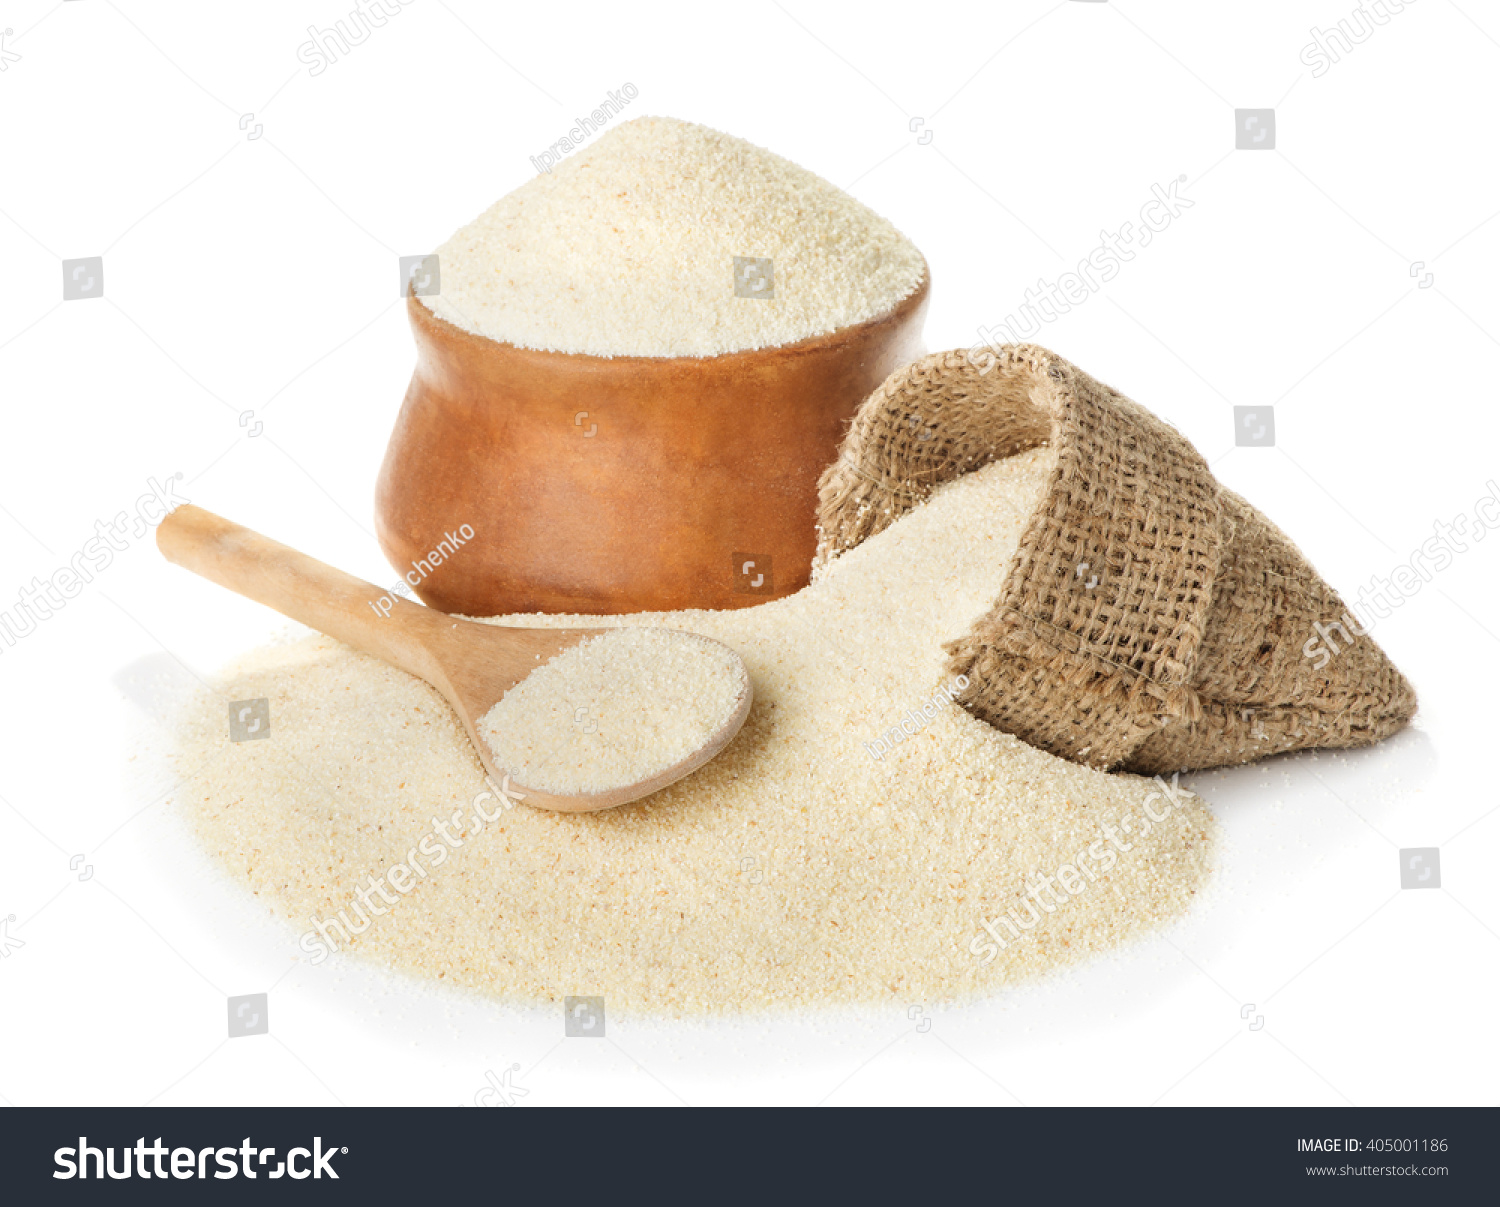 Raw unprepared semolina in bowl and spoon close-up isolated on white background #405001186